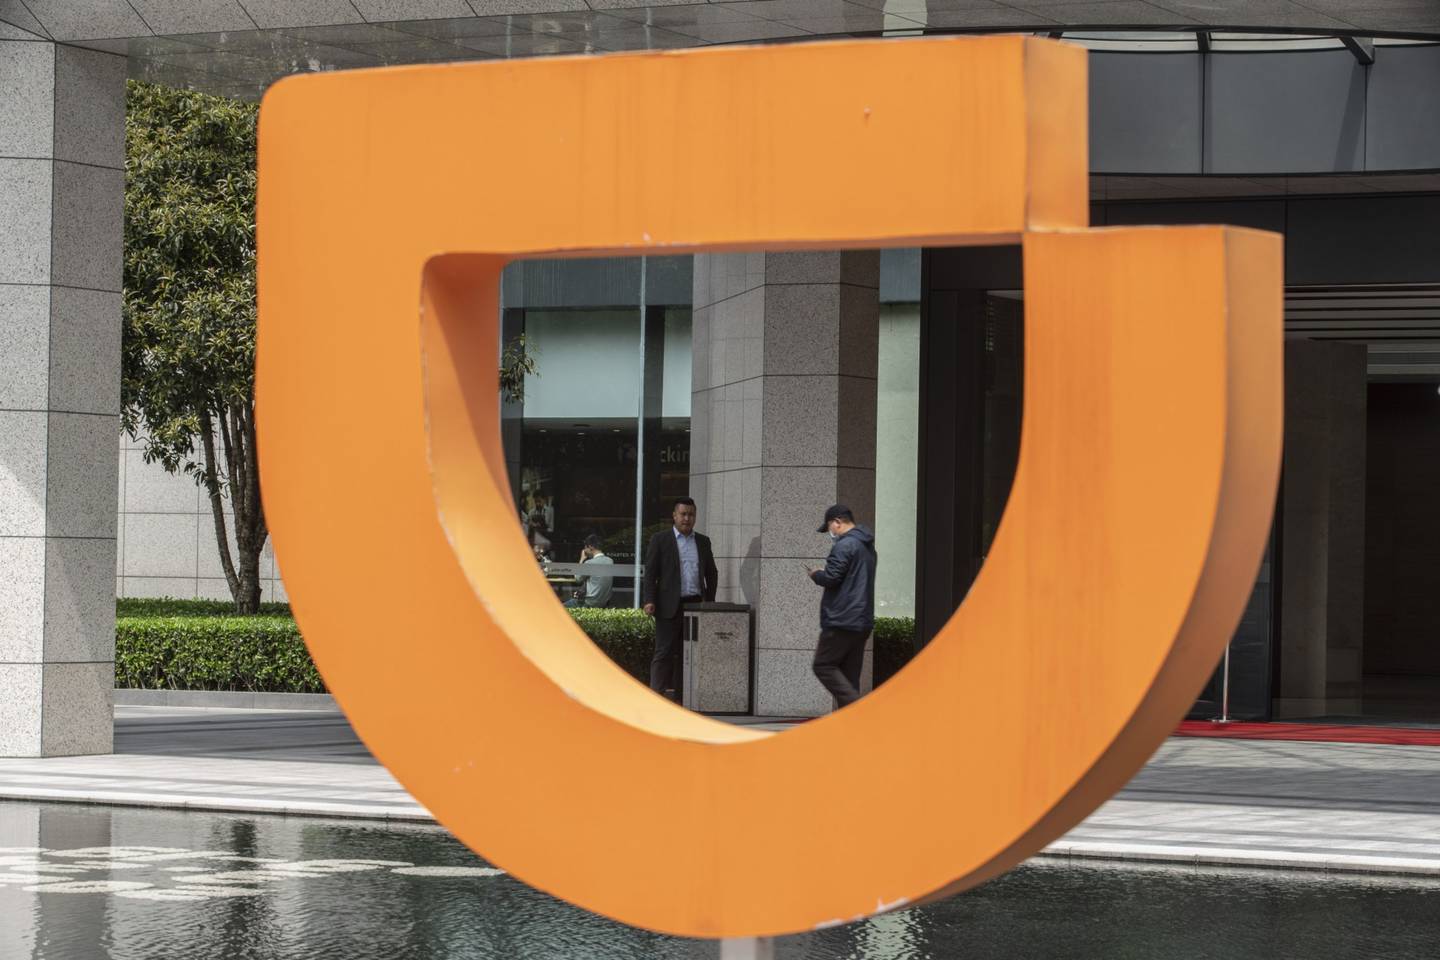 Signage outside the Didi Chuxing Technology Co. offices in Hangzhou, China, on Wednesday, March 24, 2021. Chinese ride-hailing giant Didi is accelerating plans for an initial public offering to as early as next quarter to capitalize on a post-pandemic turnaround, people familiar with its plans said. Photographer: Qilai Shen/Bloomberg